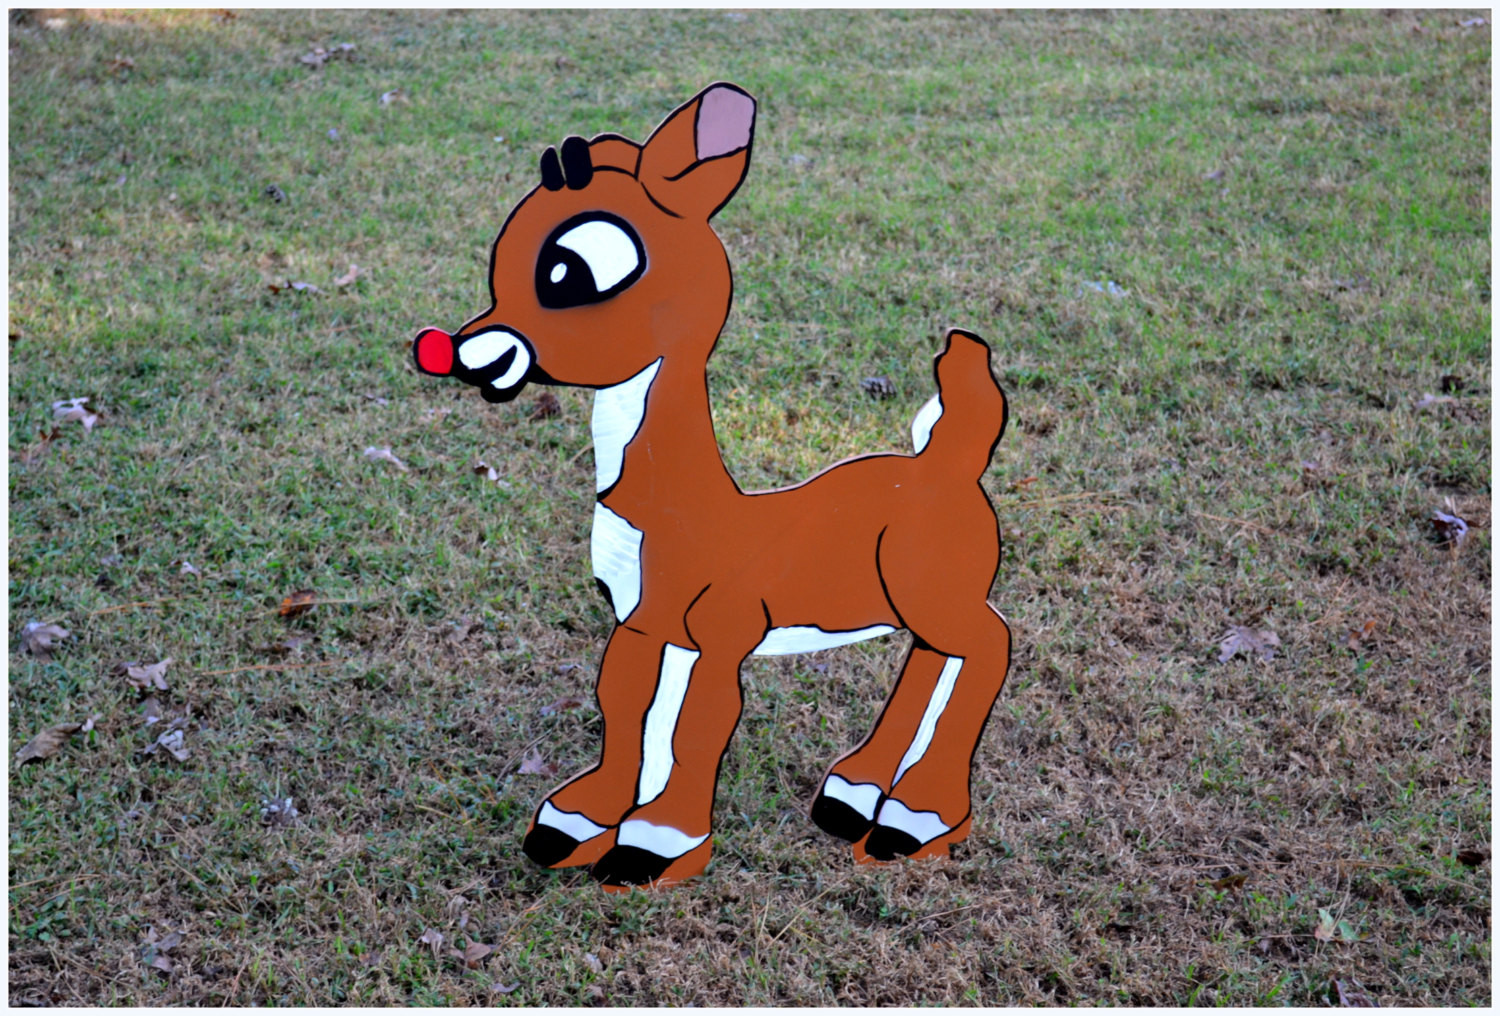 Rudolph Outdoor Christmas Decorations
 Rudolph Yard Art Outdoor Christmas Decoration by PricklyPaw